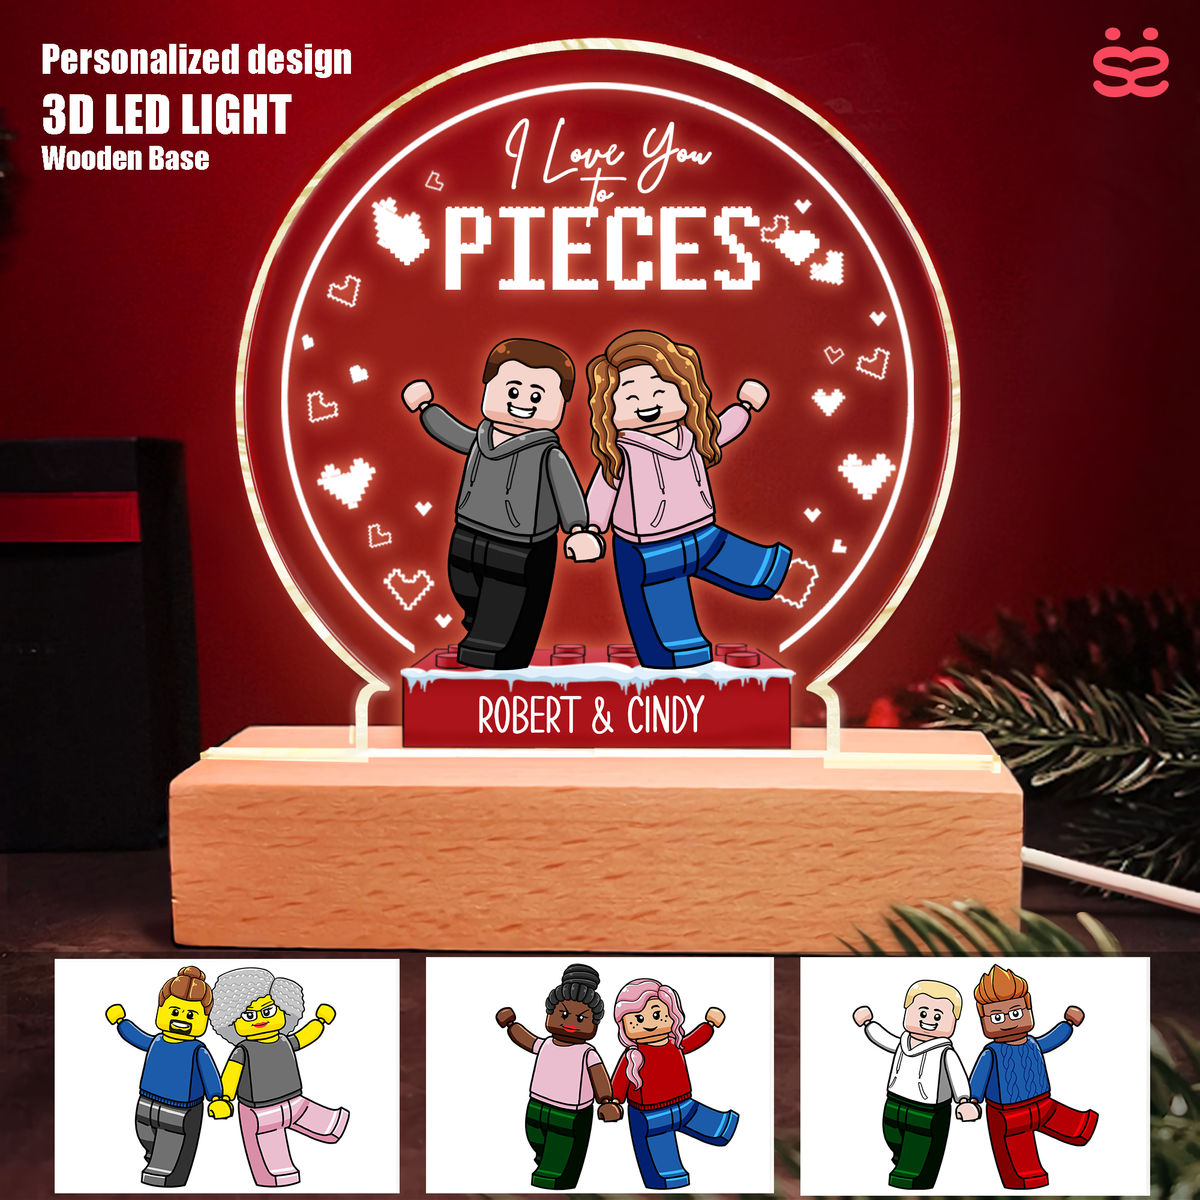 Valentine Gift for Sweetheart - I love you to pieces - Personalized 3D LED Light Wooden Base (2401)_3